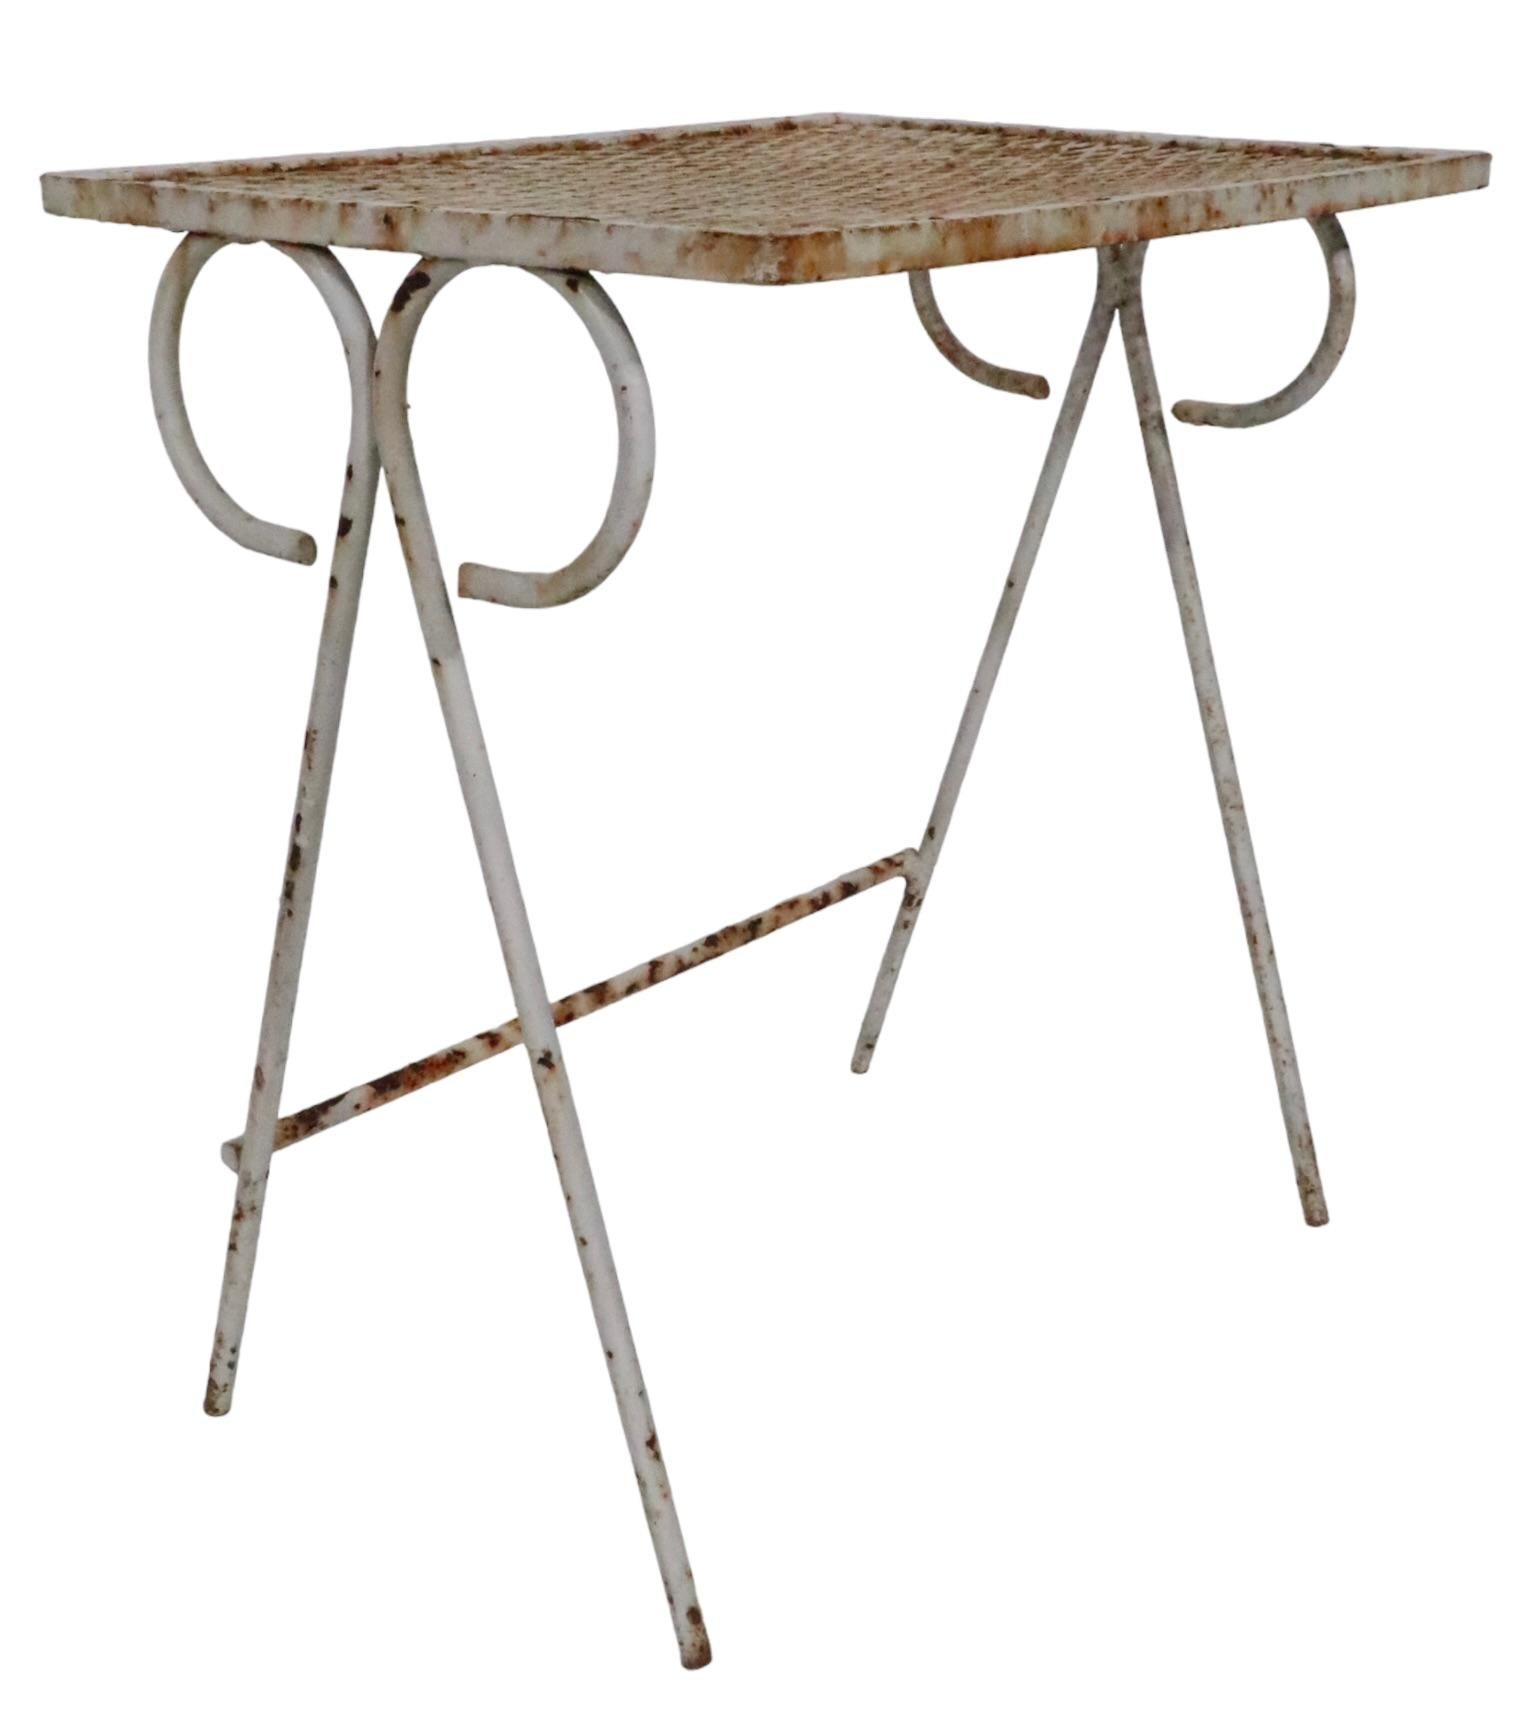 Set of Two Wrought Iron Nesting Tables by Tempestini for Salterini, circa 1950s For Sale 3